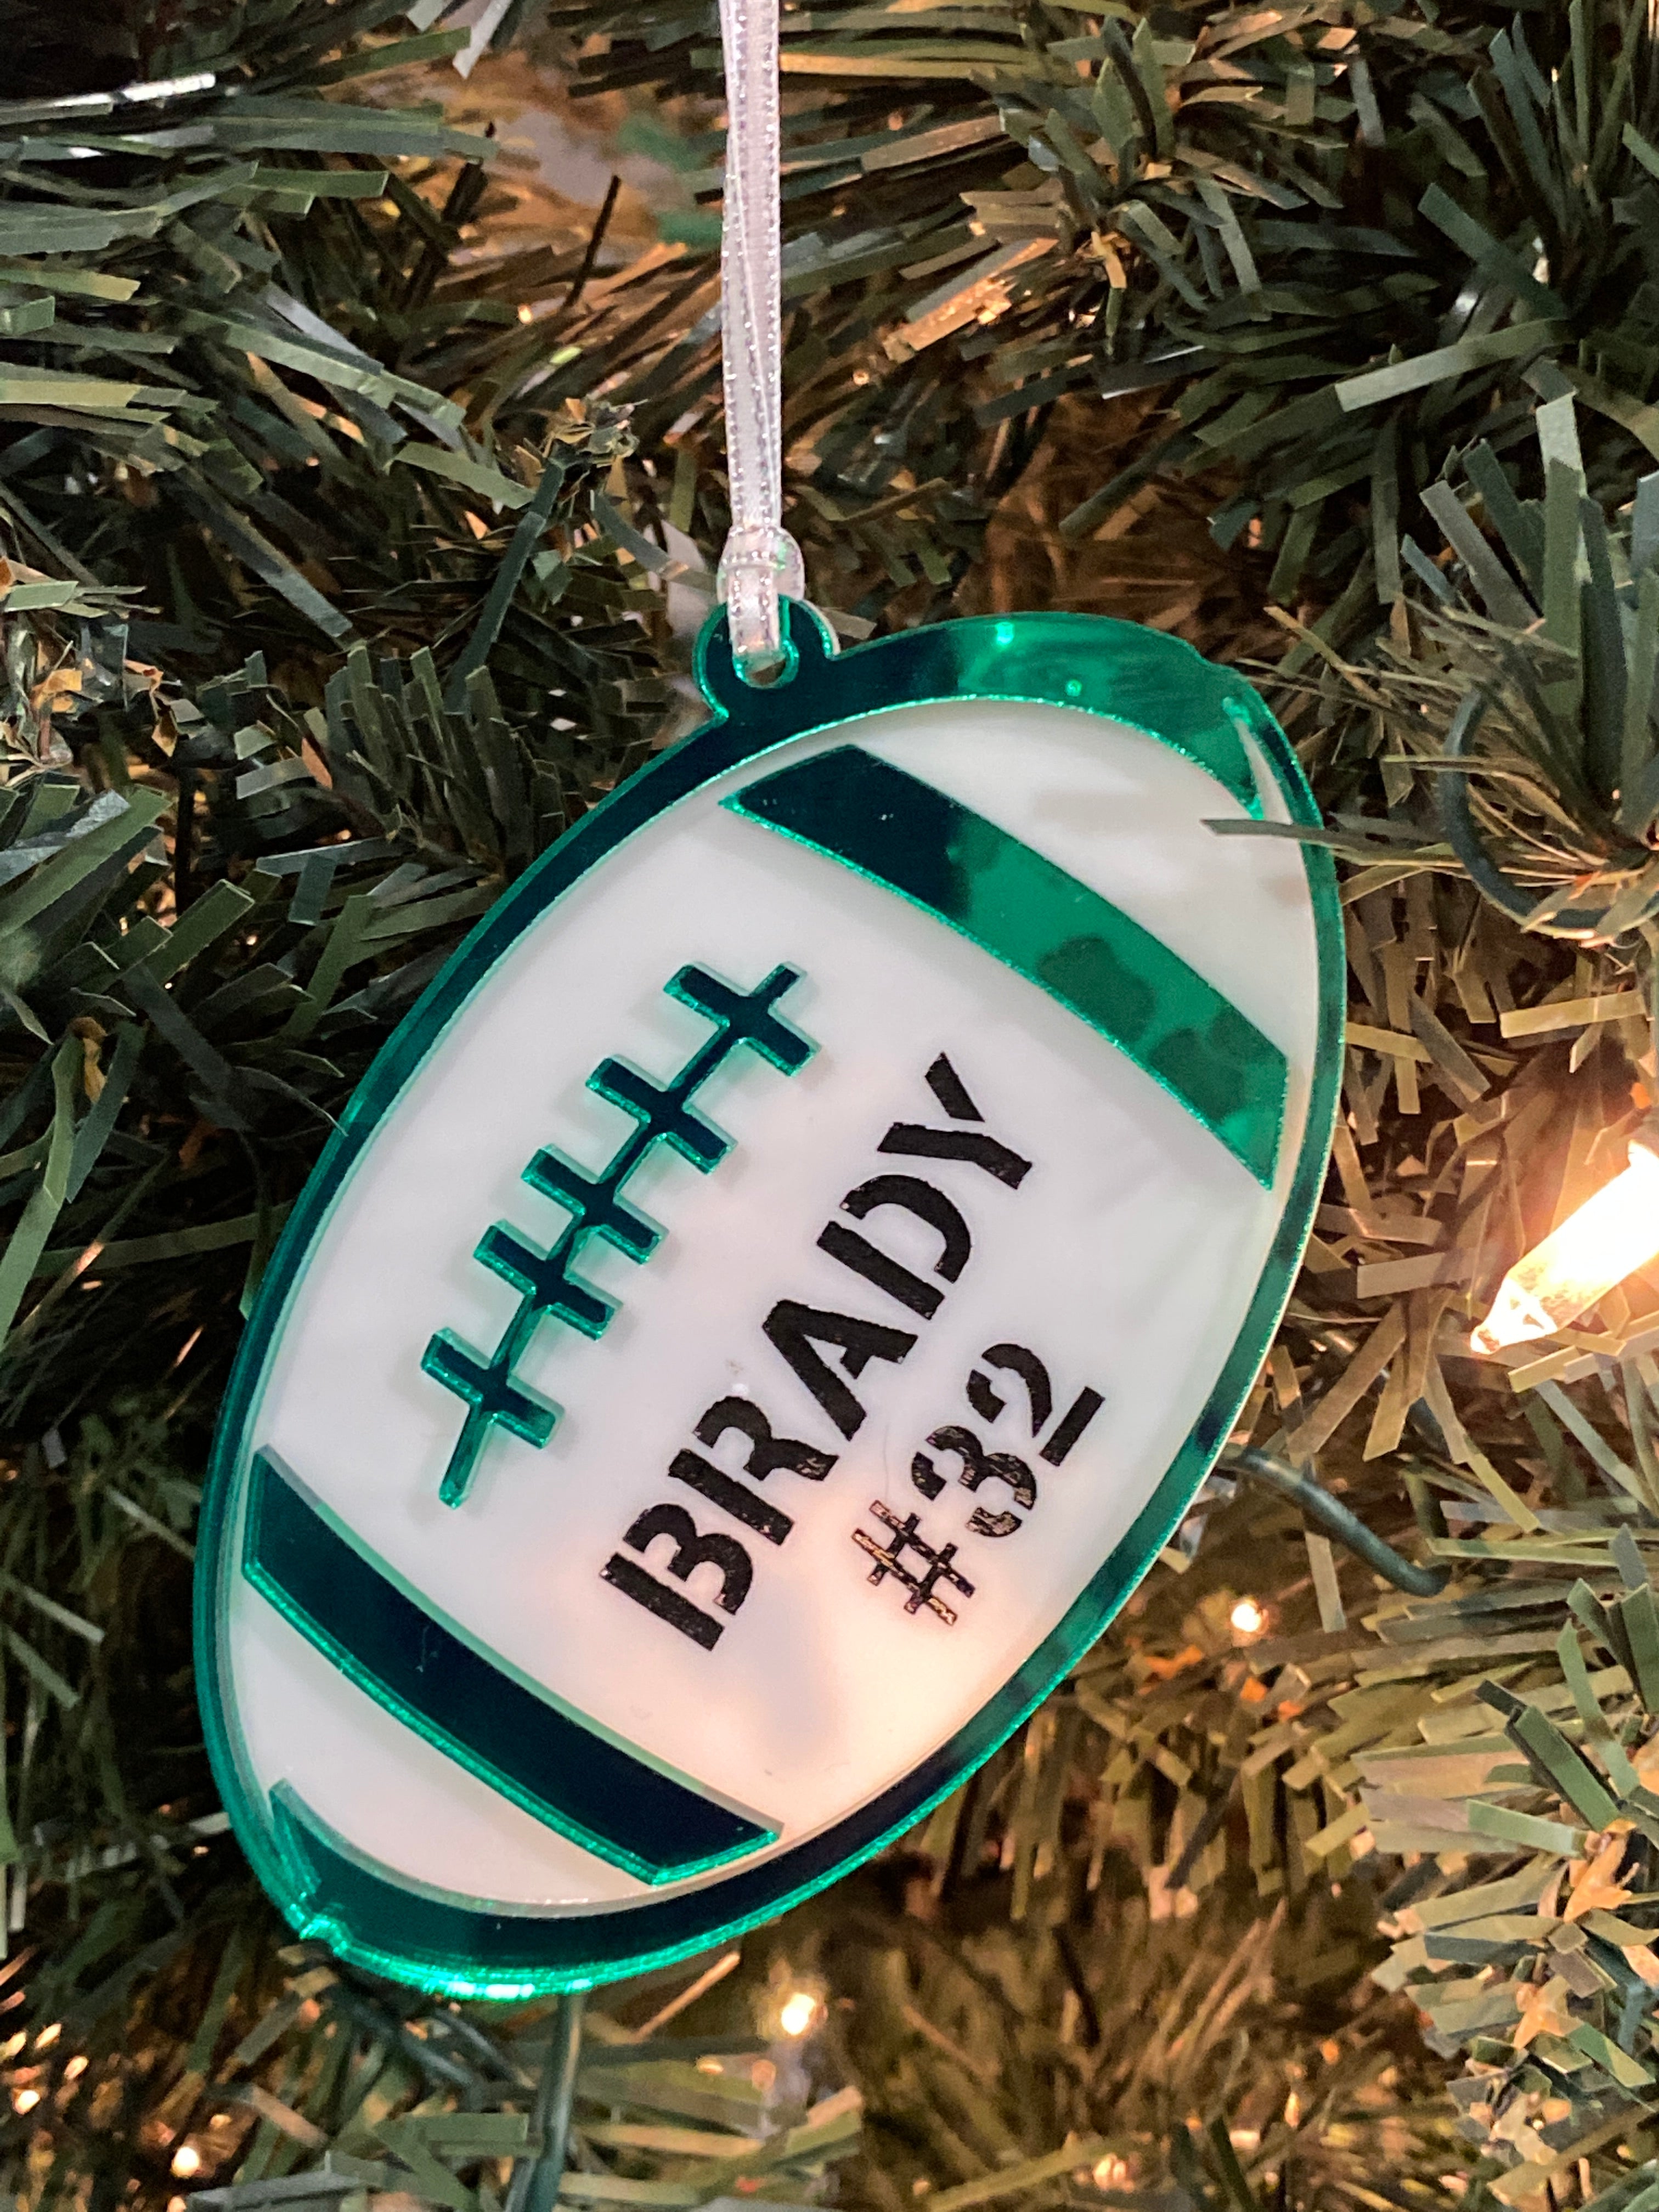 Football Personalized Ornament